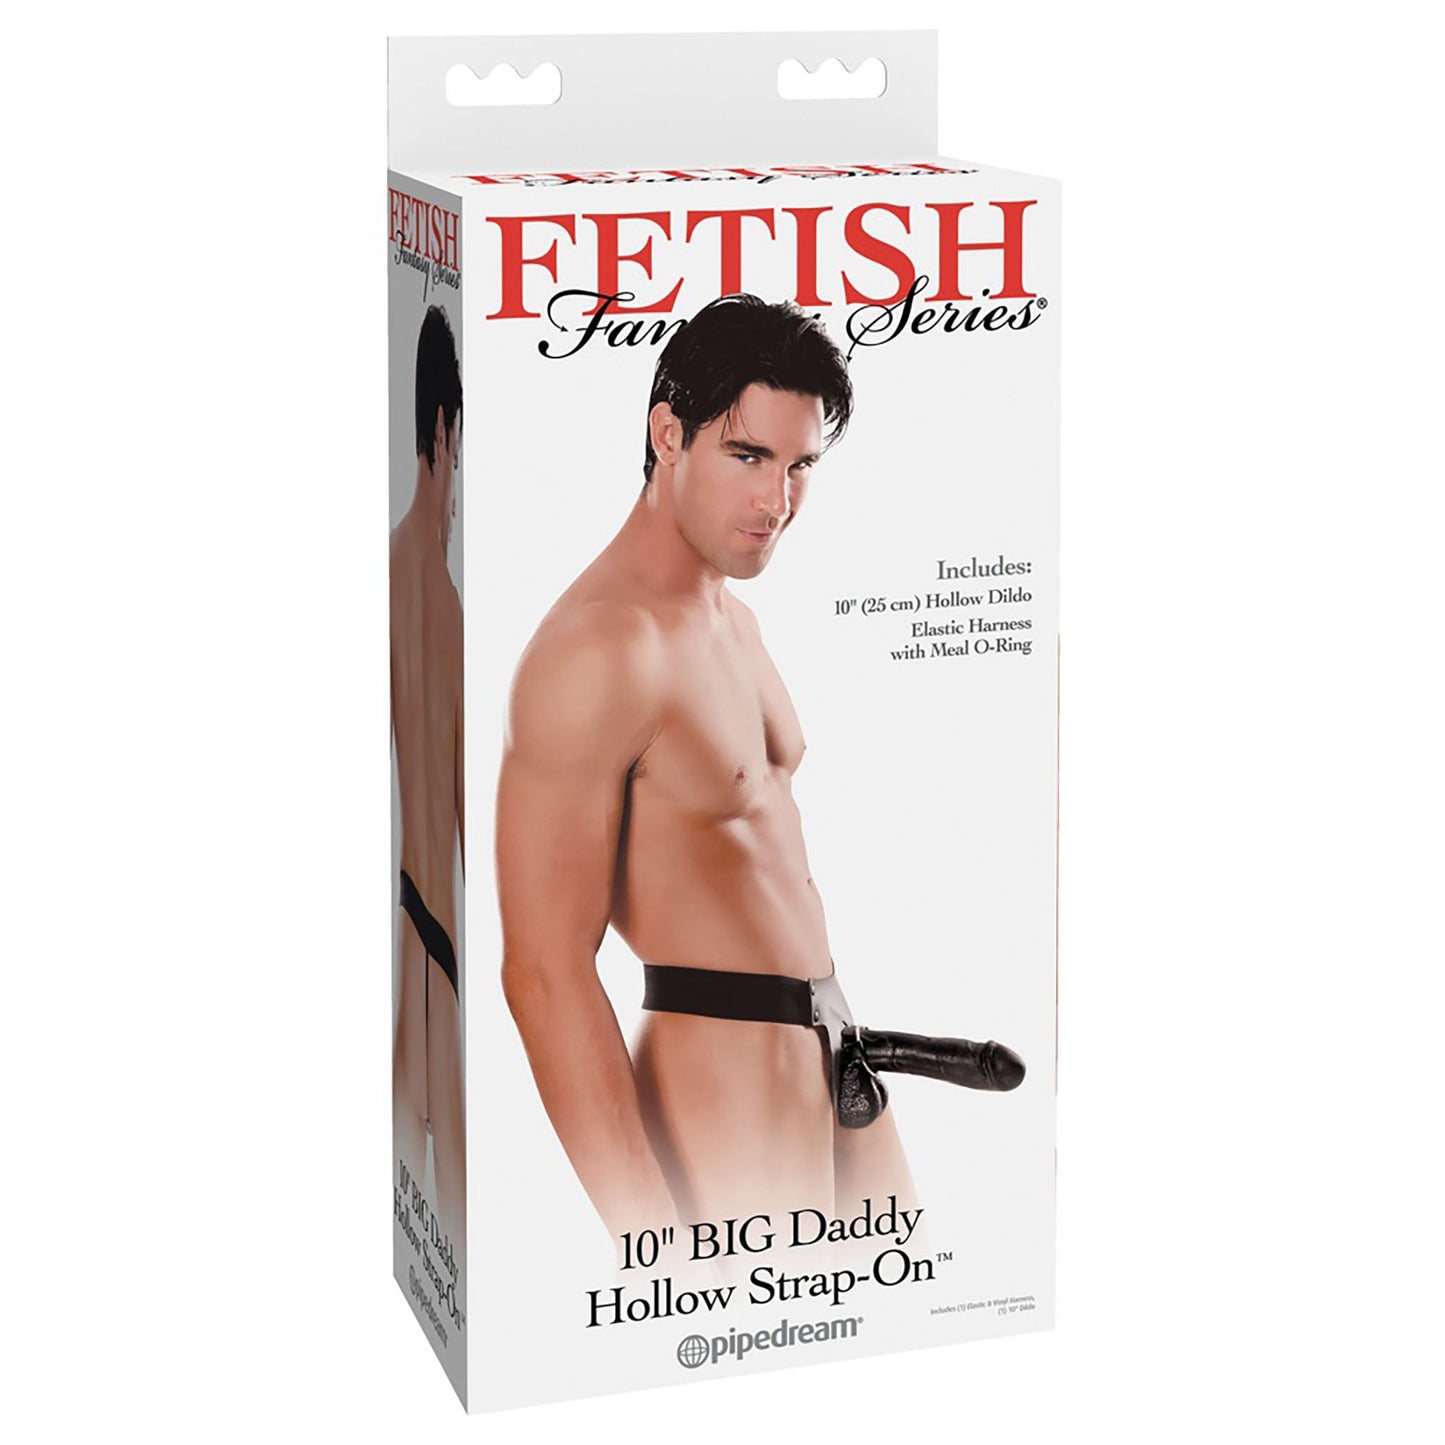 10 Inch Big Daddy Hollow Strap-On in dunkler Hautfarbe